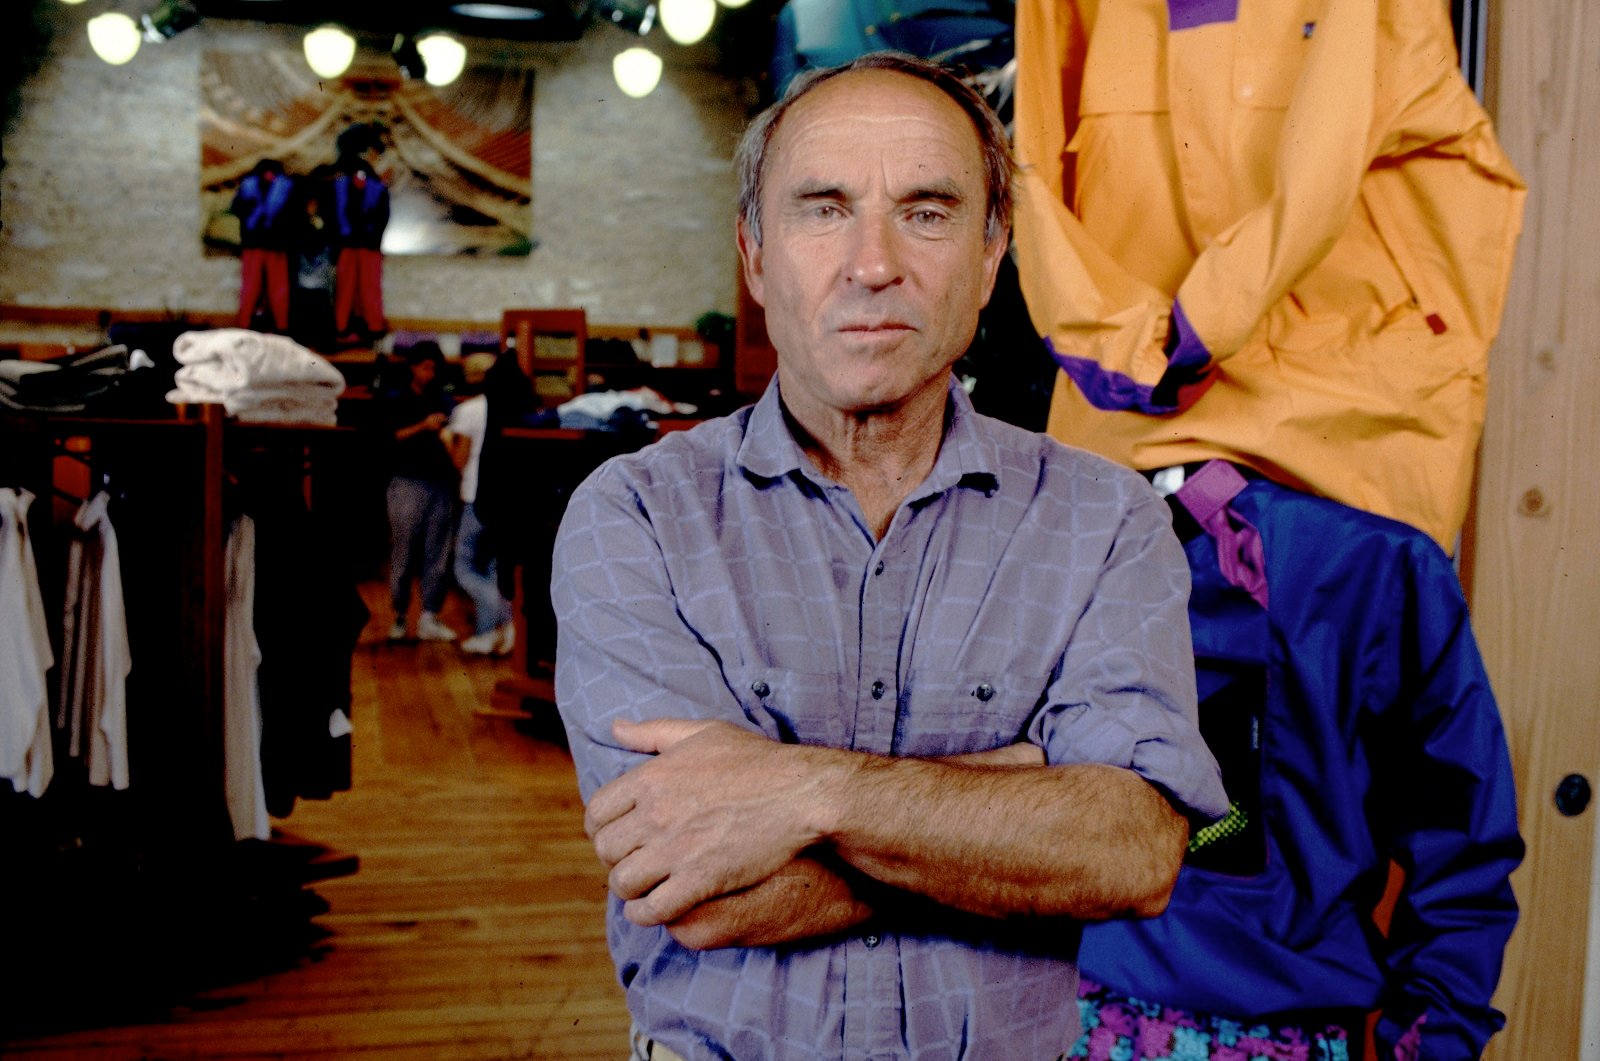 yvon-chouinard-just-donated-patagonia-to-charity-the-entire-company